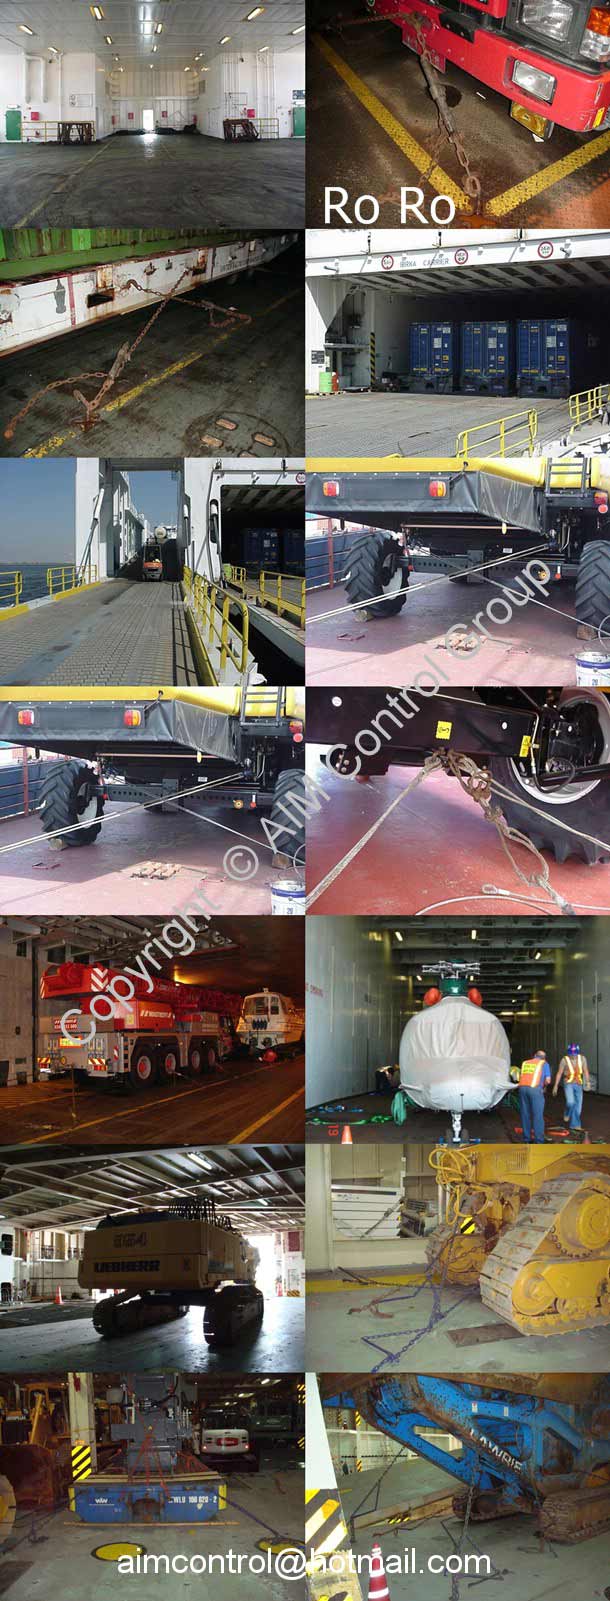 Heavy_lift_project_cargo_loading_unloading_supervision_inspection_RoRo